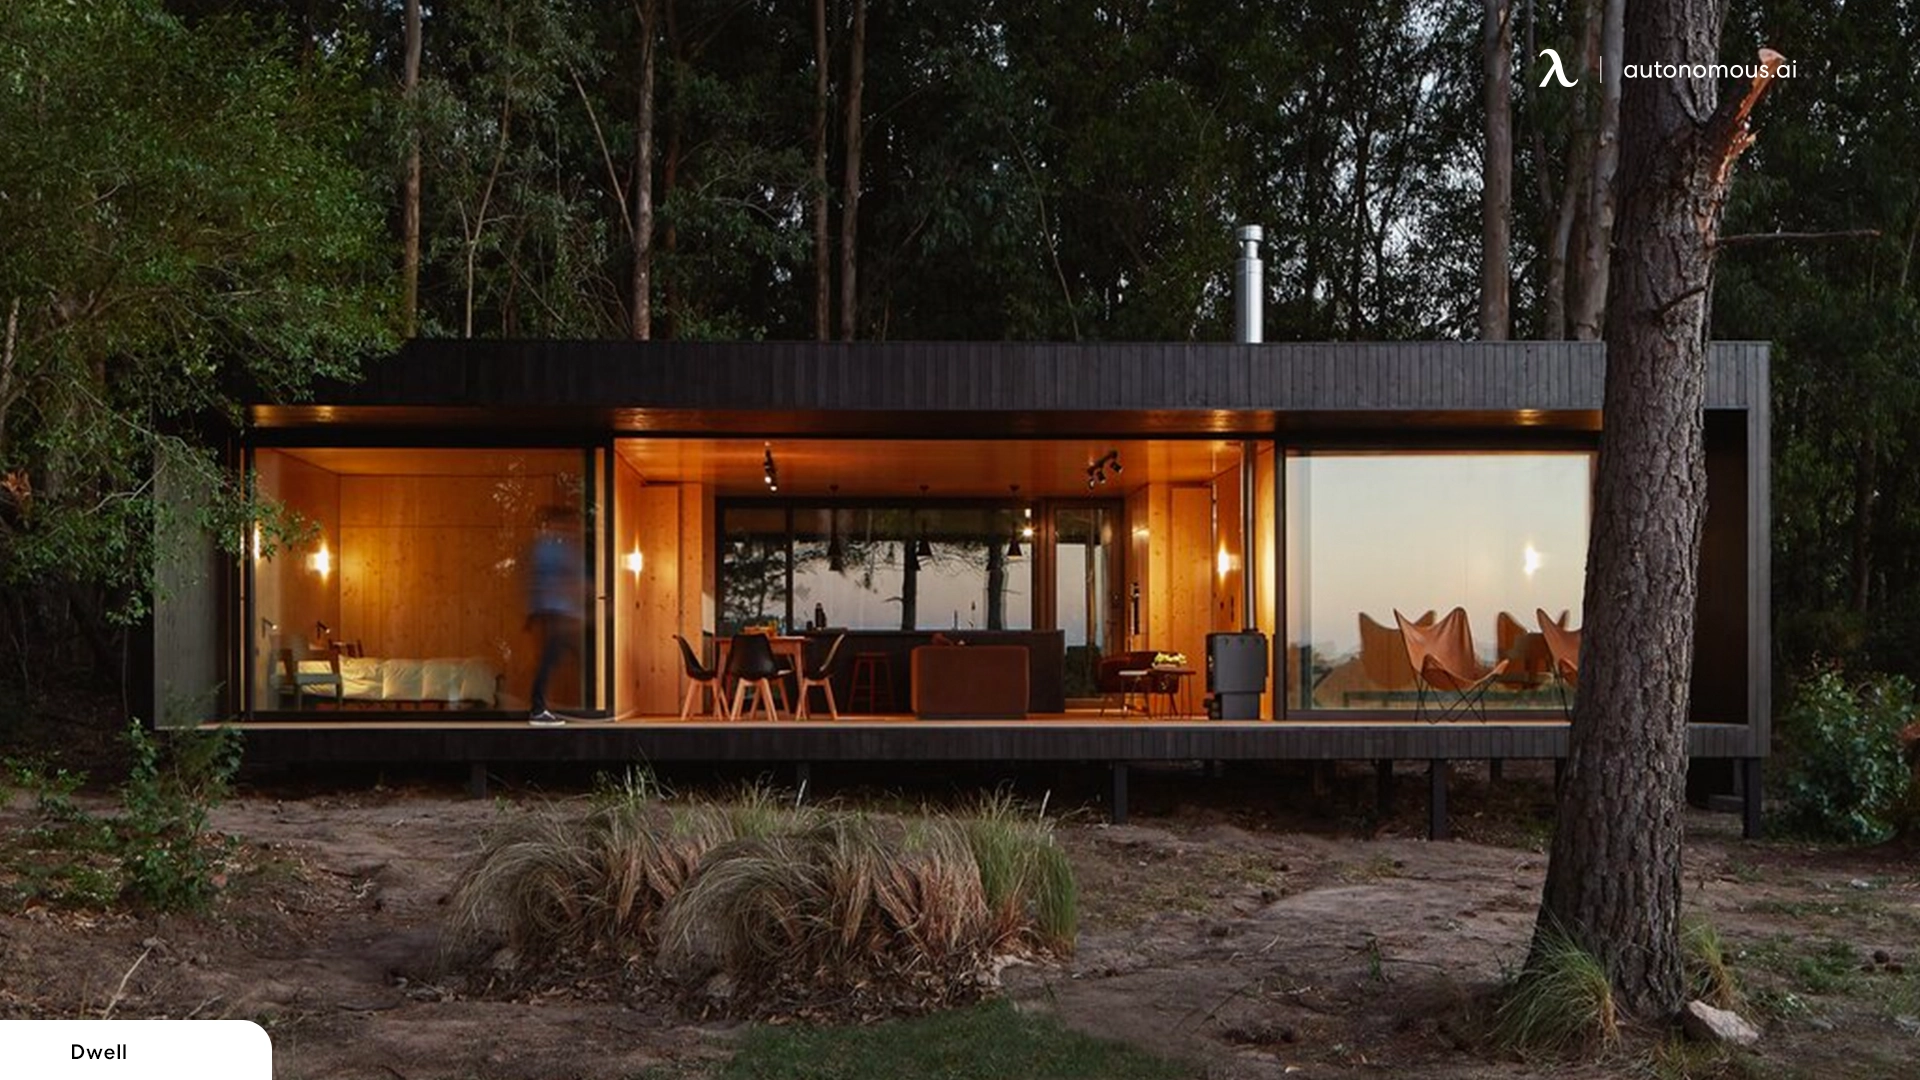 What Are the Benefits of a Prefab Cottage?